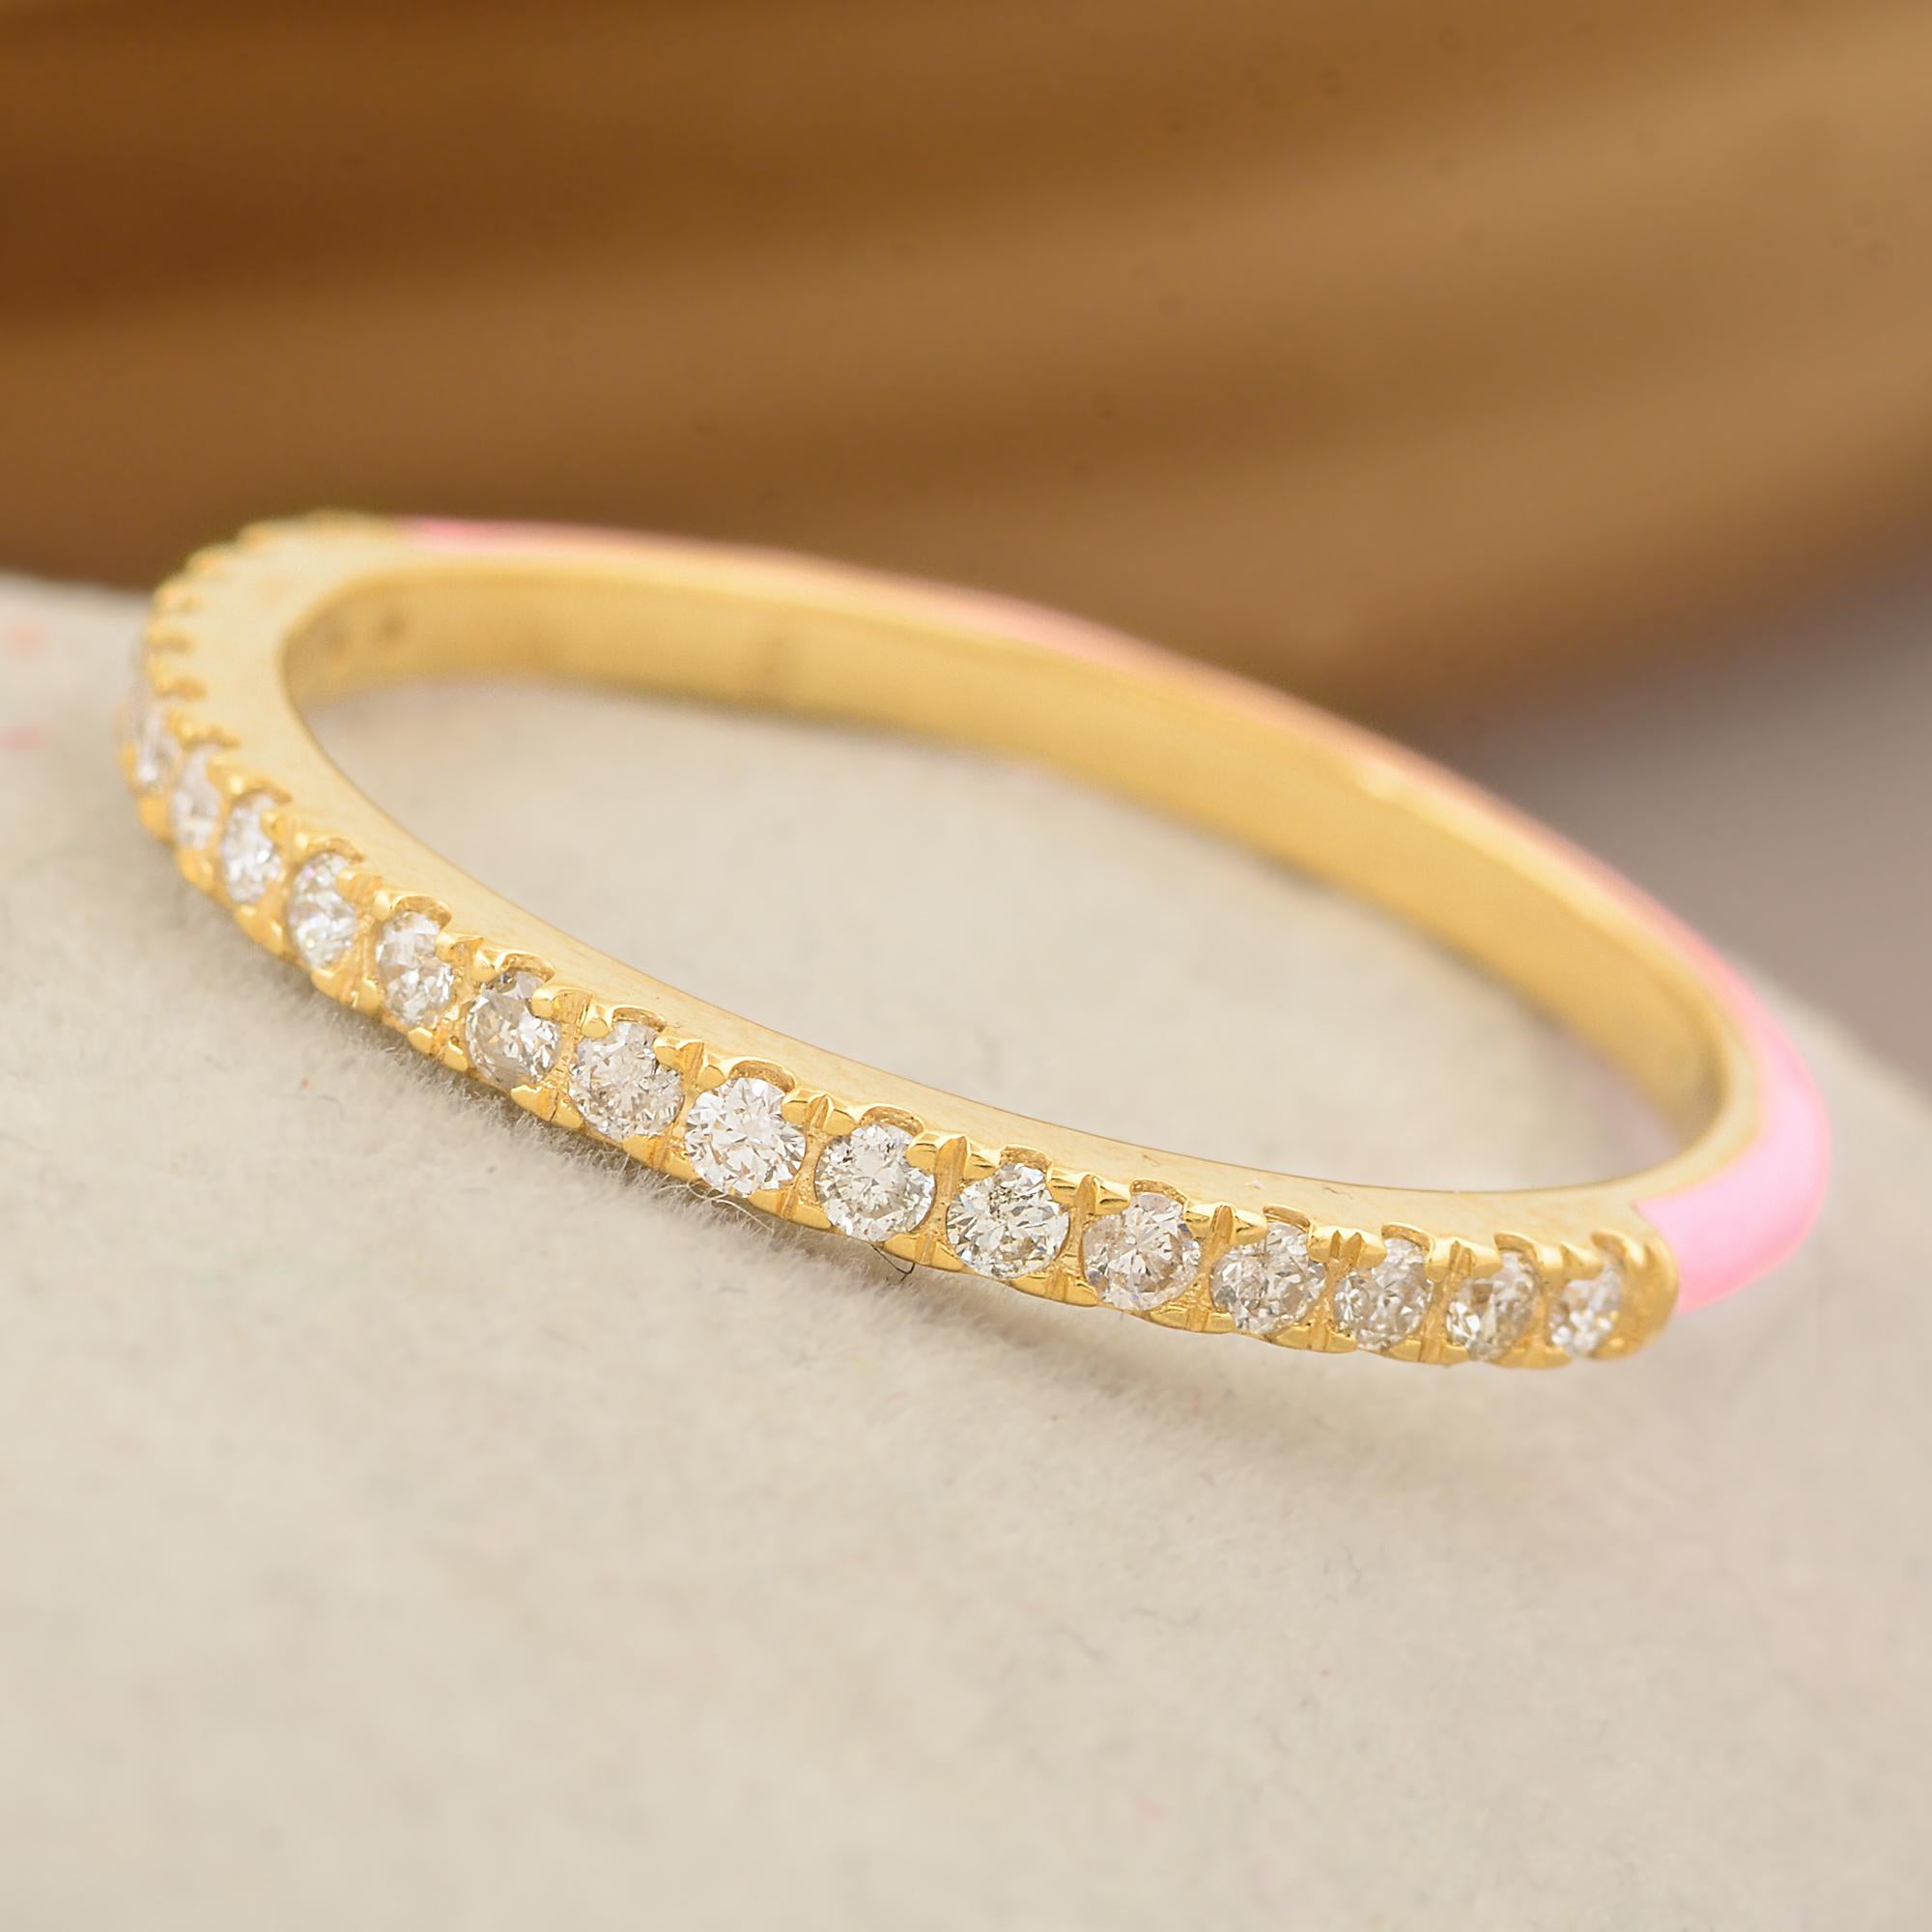 For Sale:  0.22 Carat Diamond Pave Half Band Ring Solid 18k Yellow Gold Enamel Fine Jewelry 2